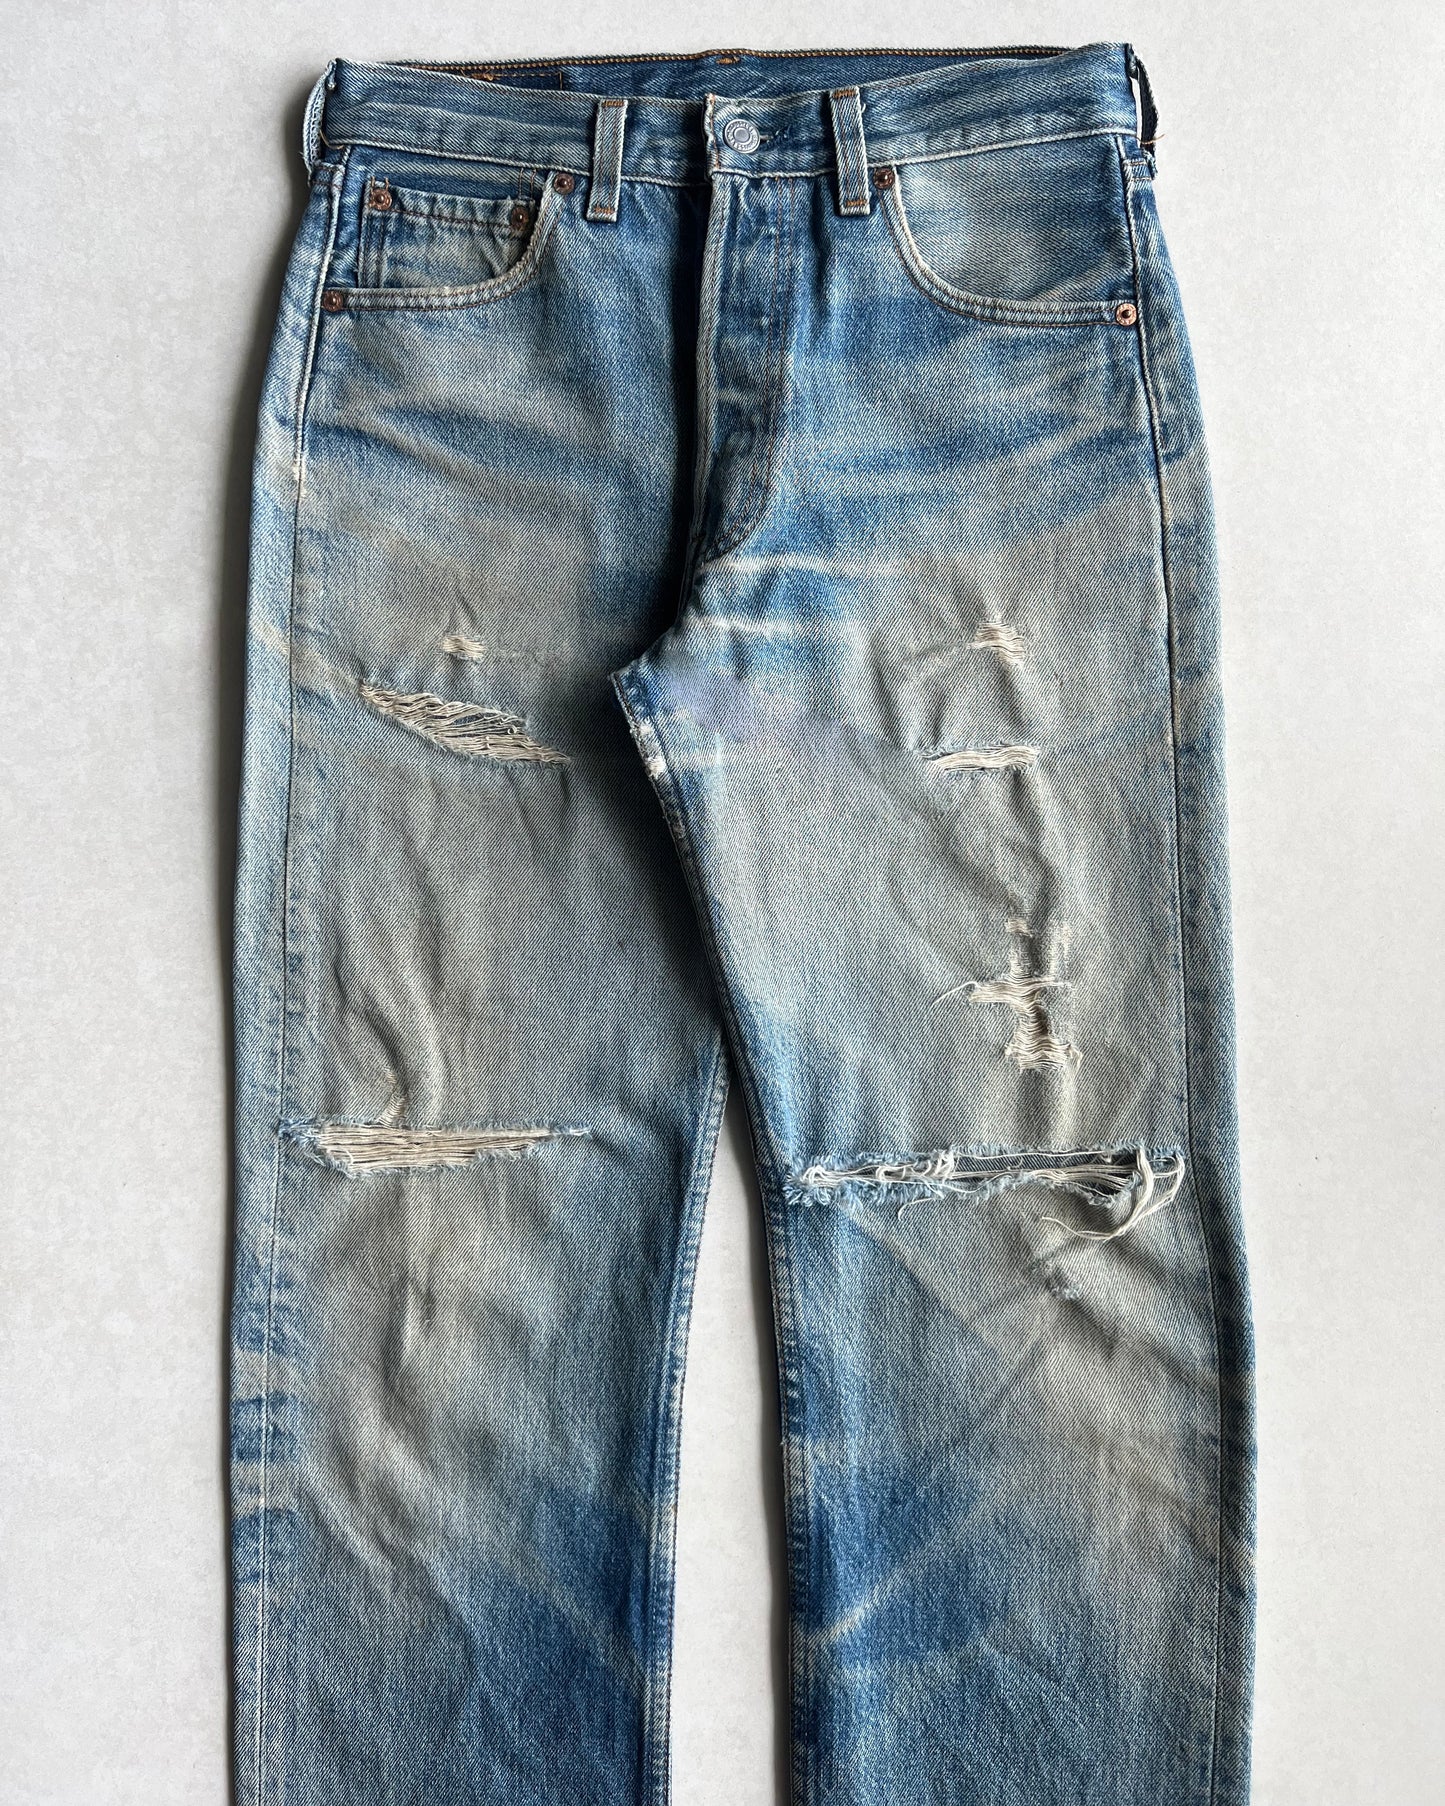 1990S FADED WASHED LEVI'S 501 REPAIRED JEANS (29X30)